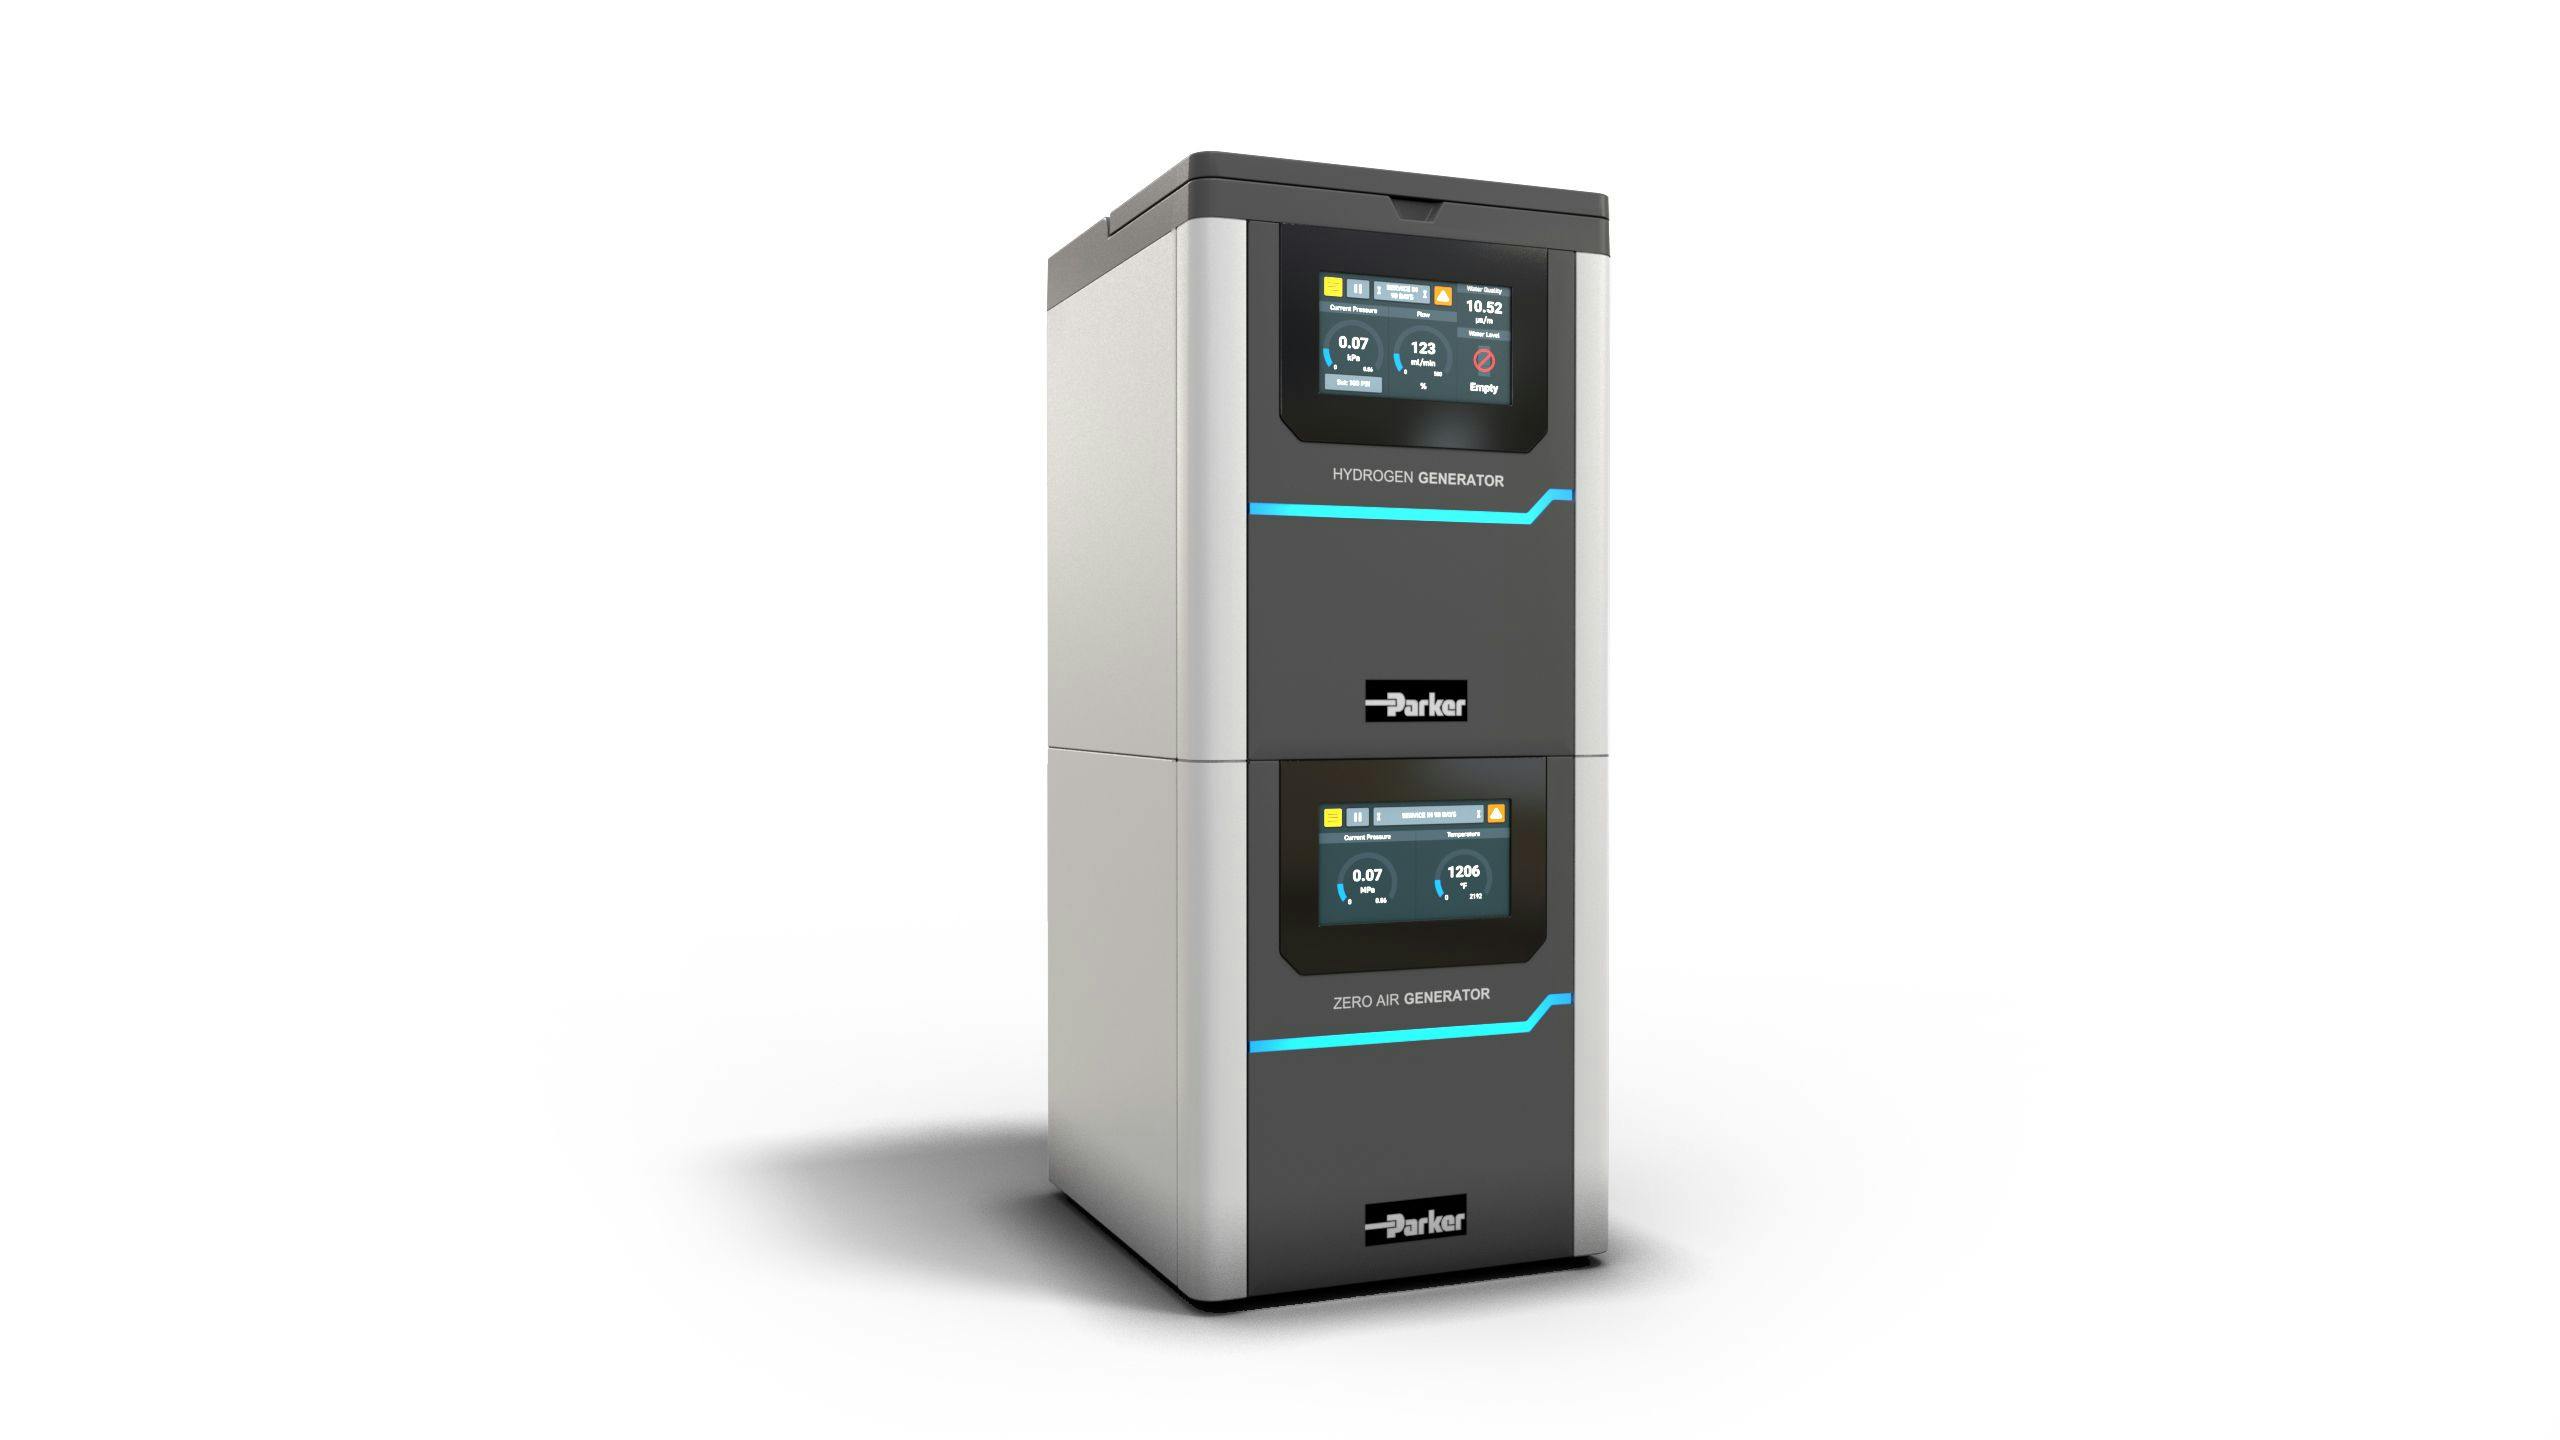 Parker’s ChromGas Series Delivers the Optimal Blend of Safety, Reliability and Performance to Global Laboratories